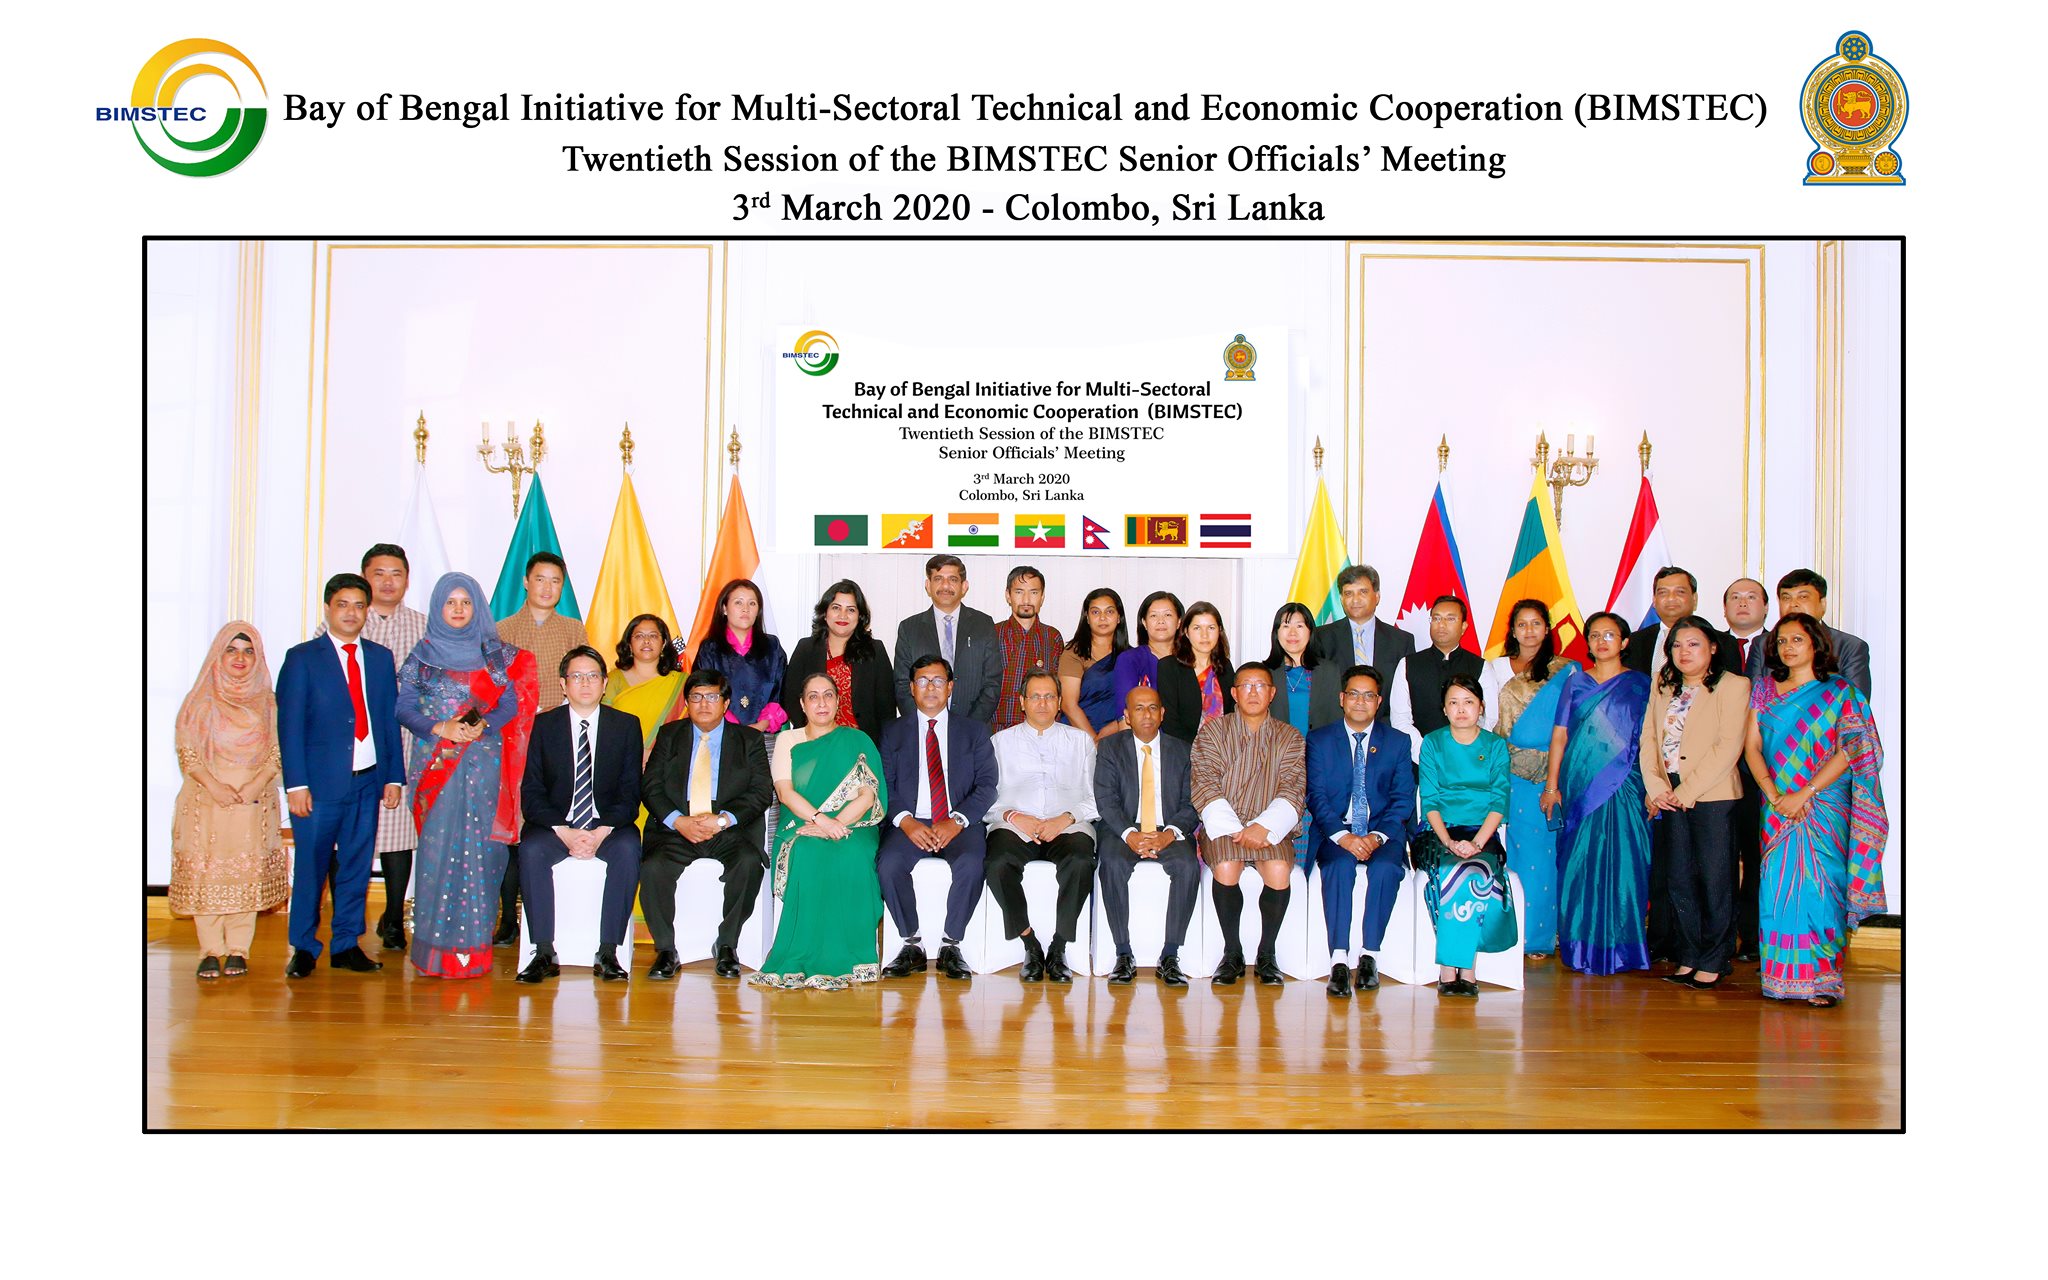 Sri Lanka will lead Science, Technology and Innovation Sector in BIMSTEC